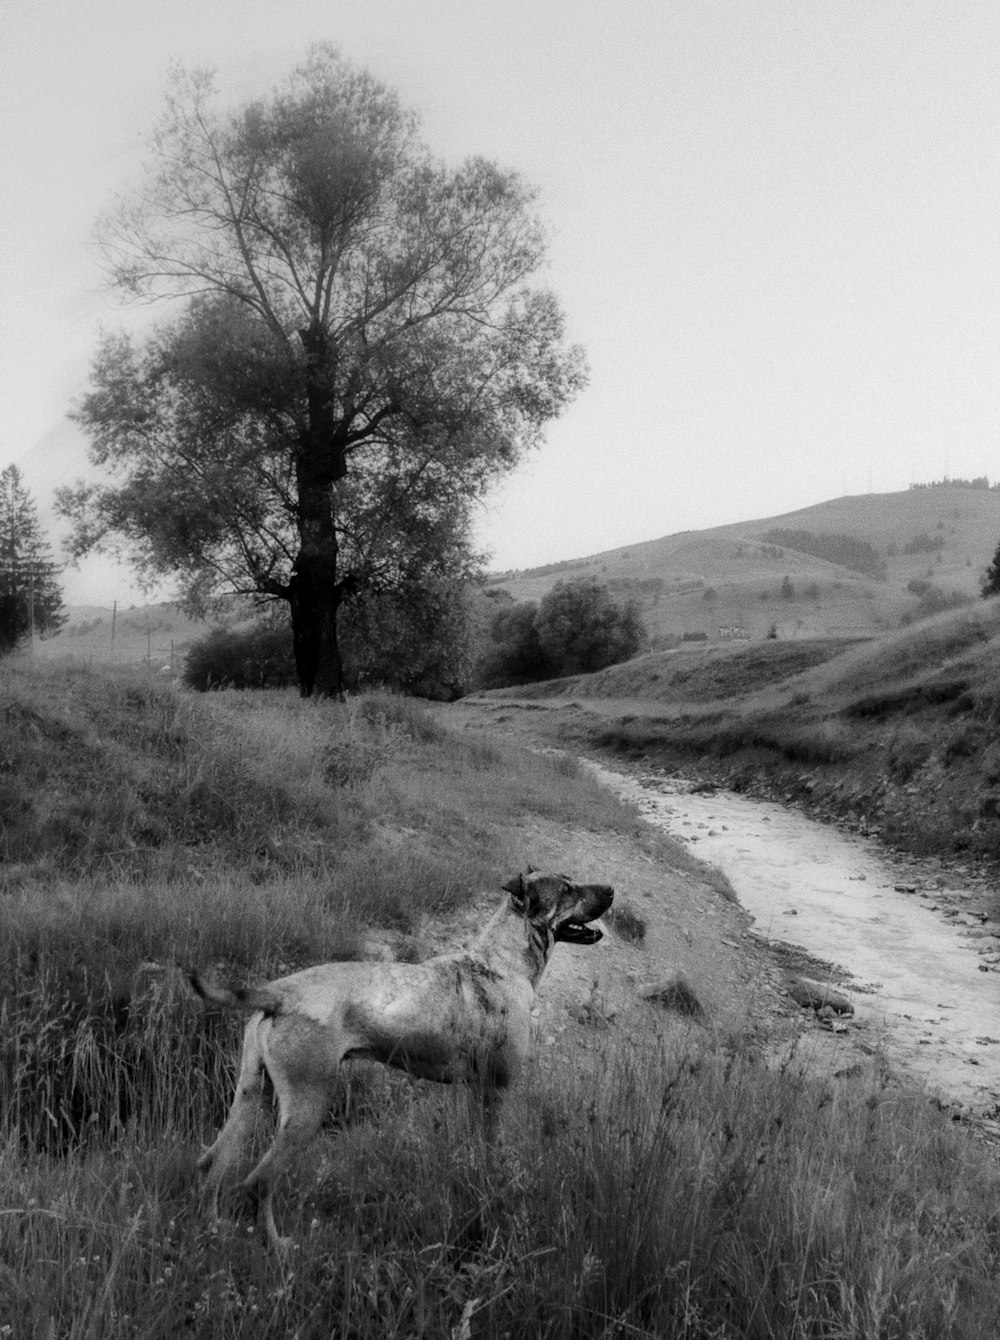 grayscale photo of dog on grass field